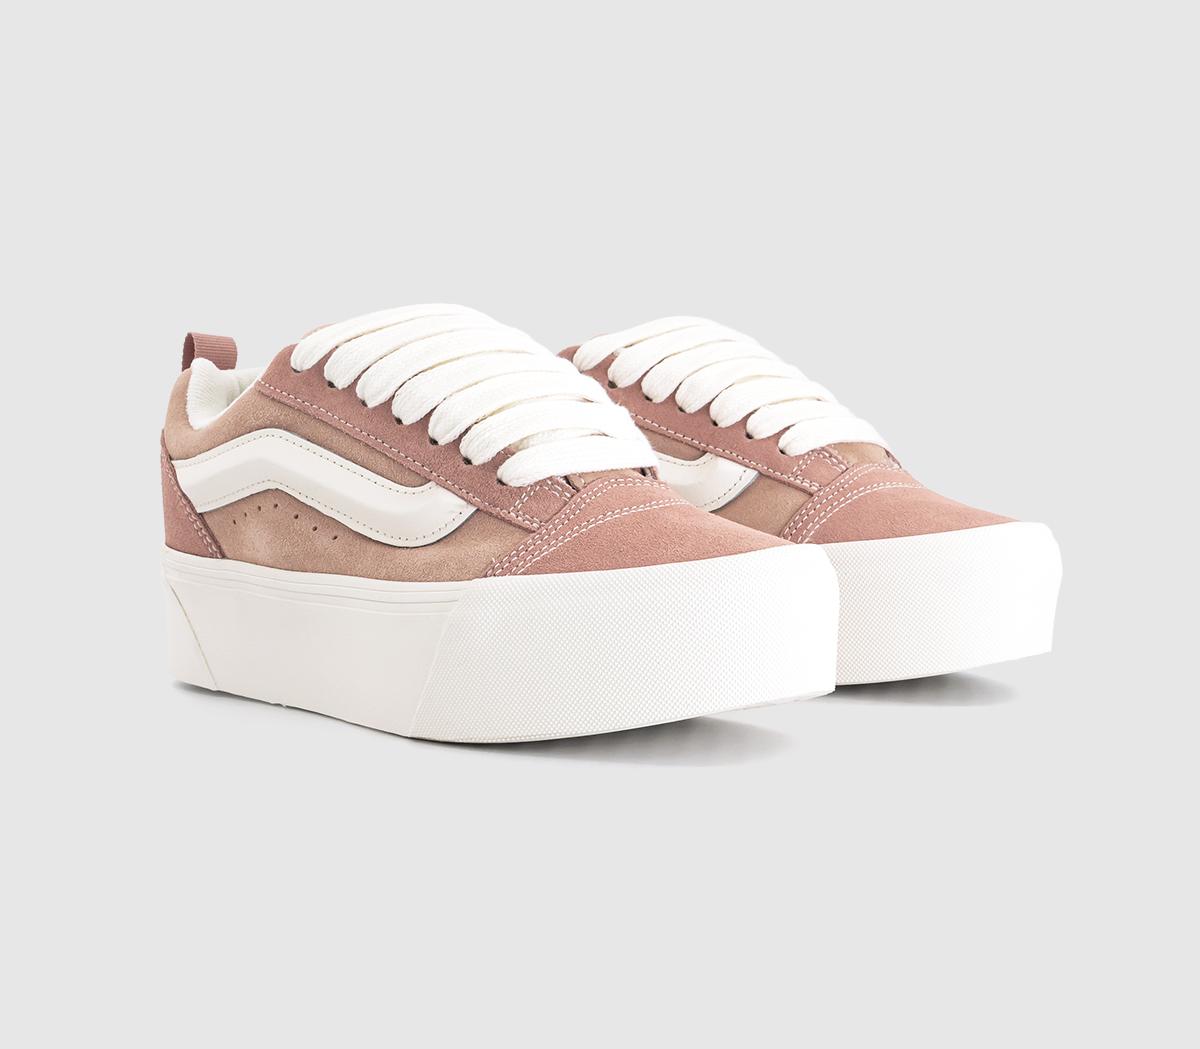 Vans Knu Stack Trainers Toasted Almond Natural, 7.5